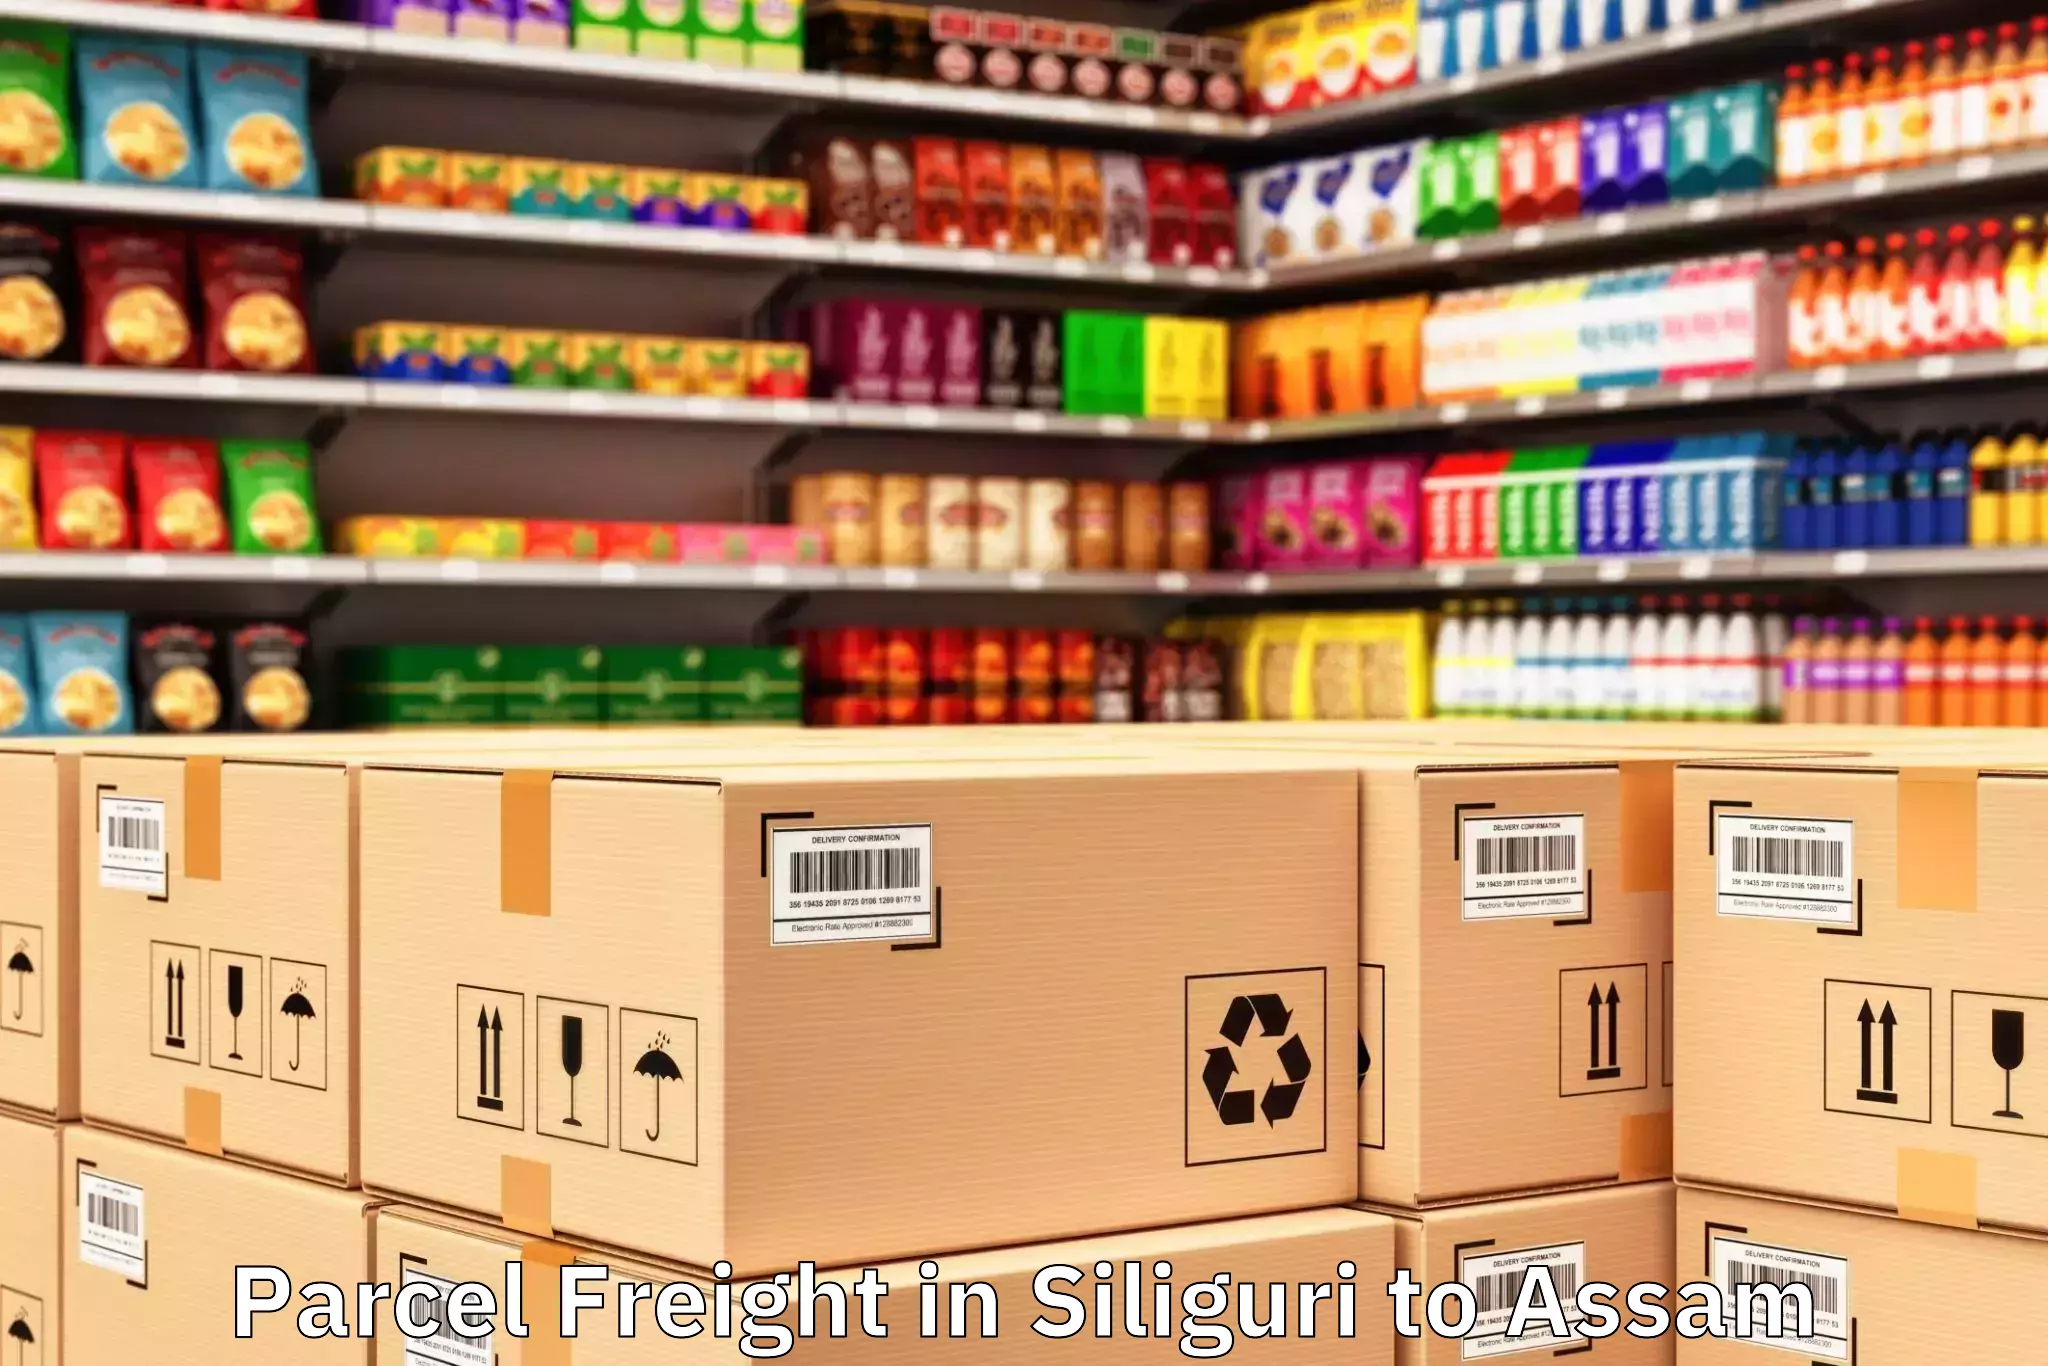 Top Siliguri to Assam Parcel Freight Available